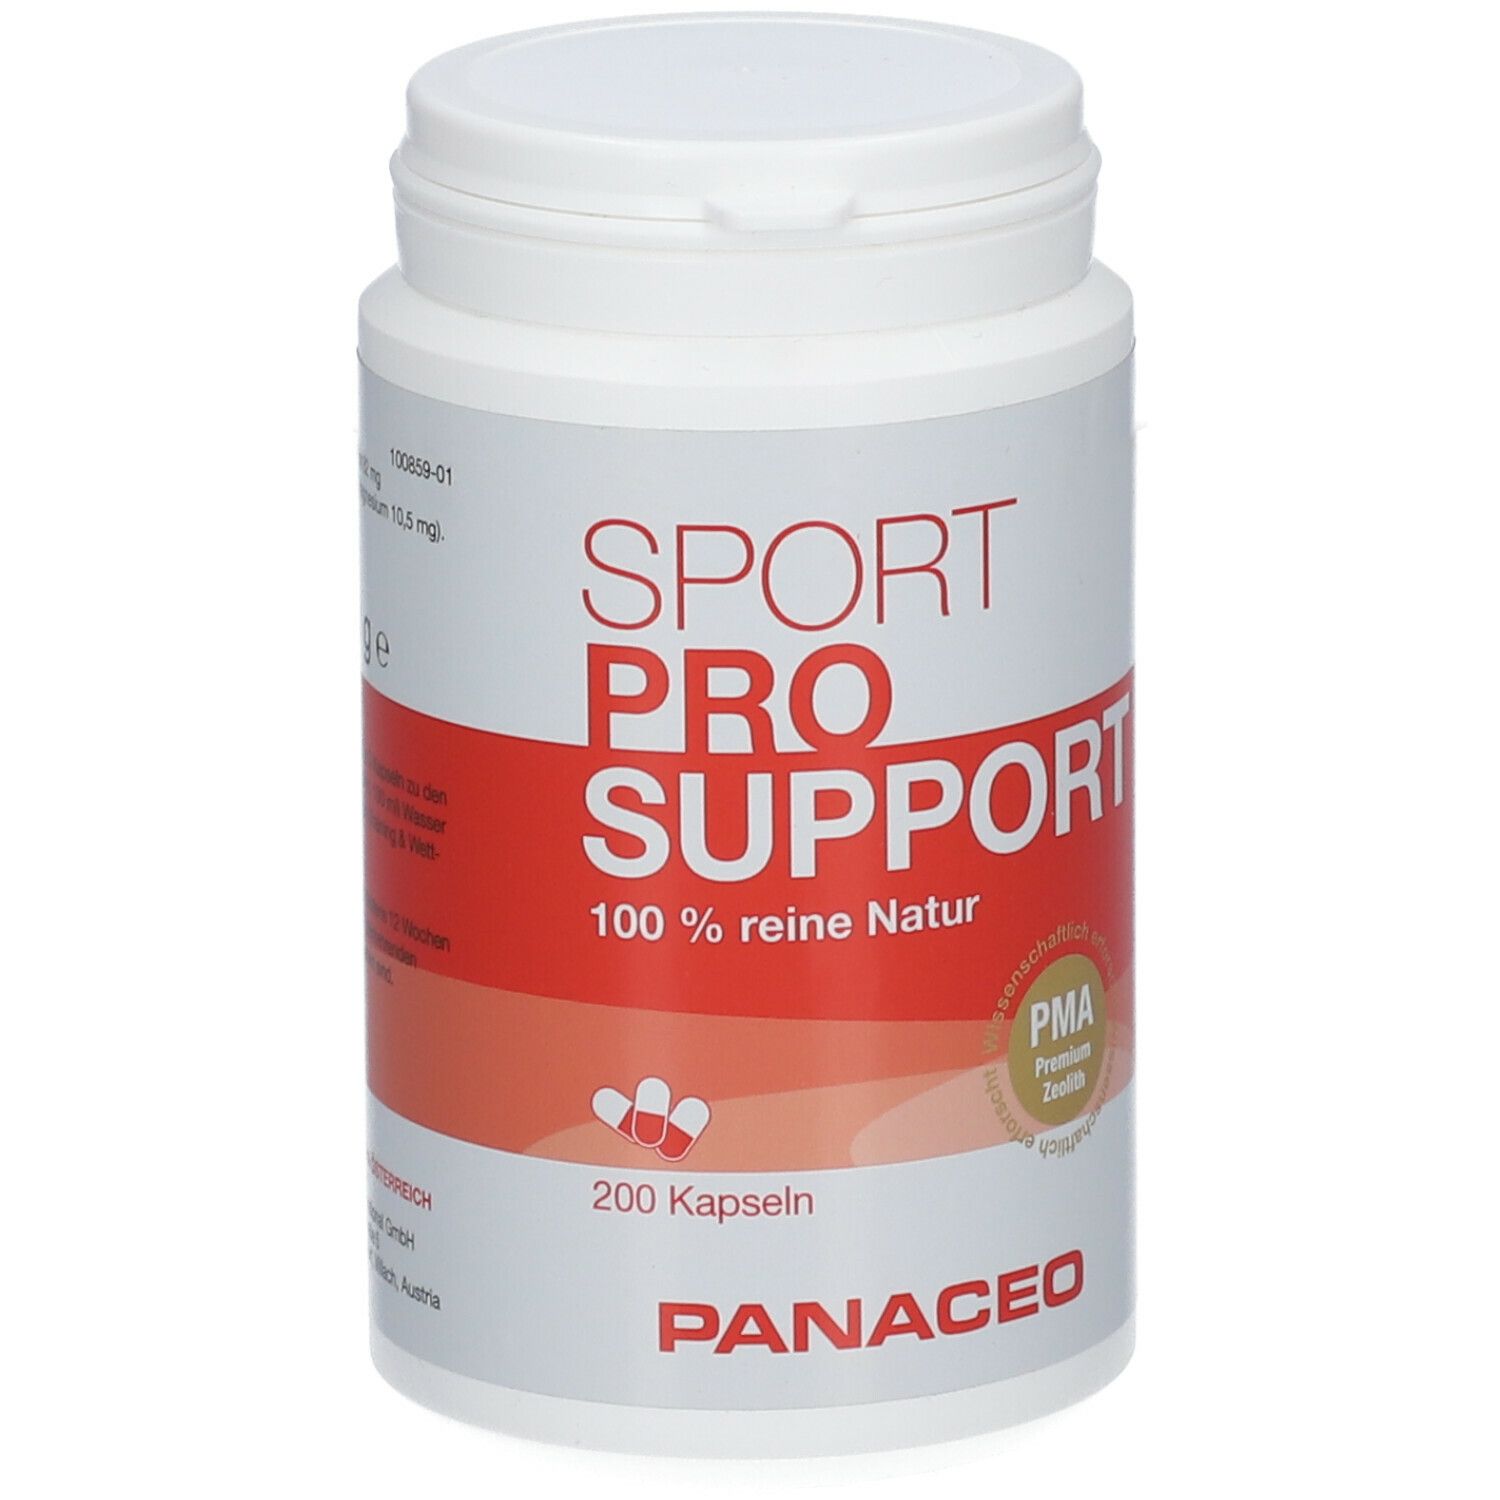 SPORT PRO SUPPORT PANACEO